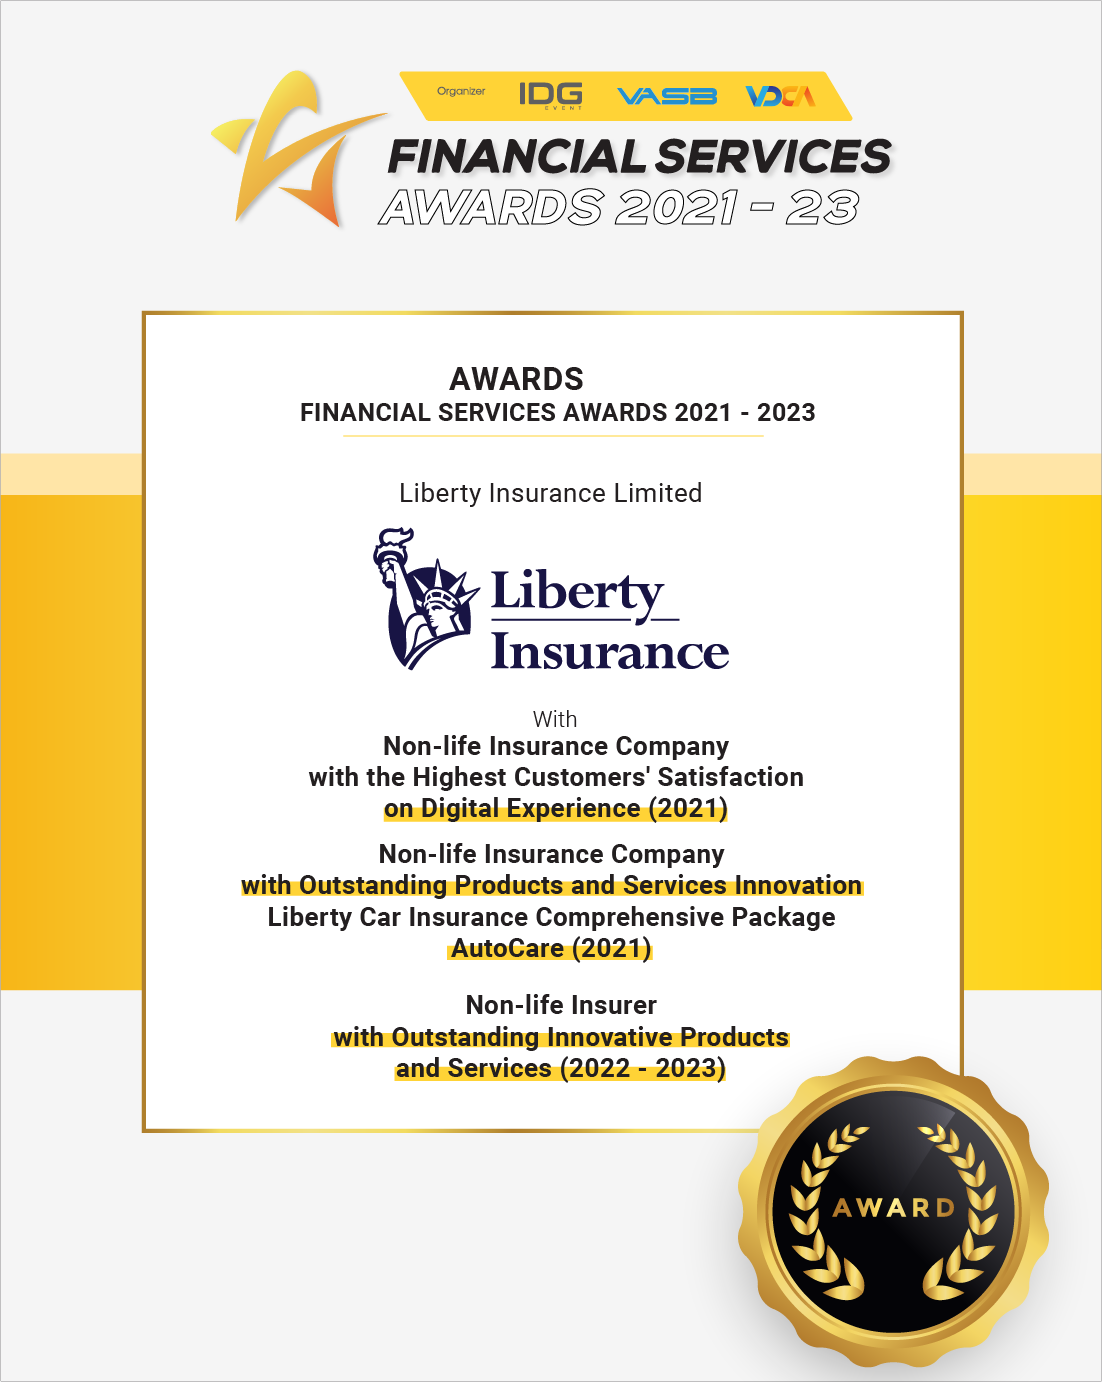 Liberty Insurance with 4 IDG awards in 4 years